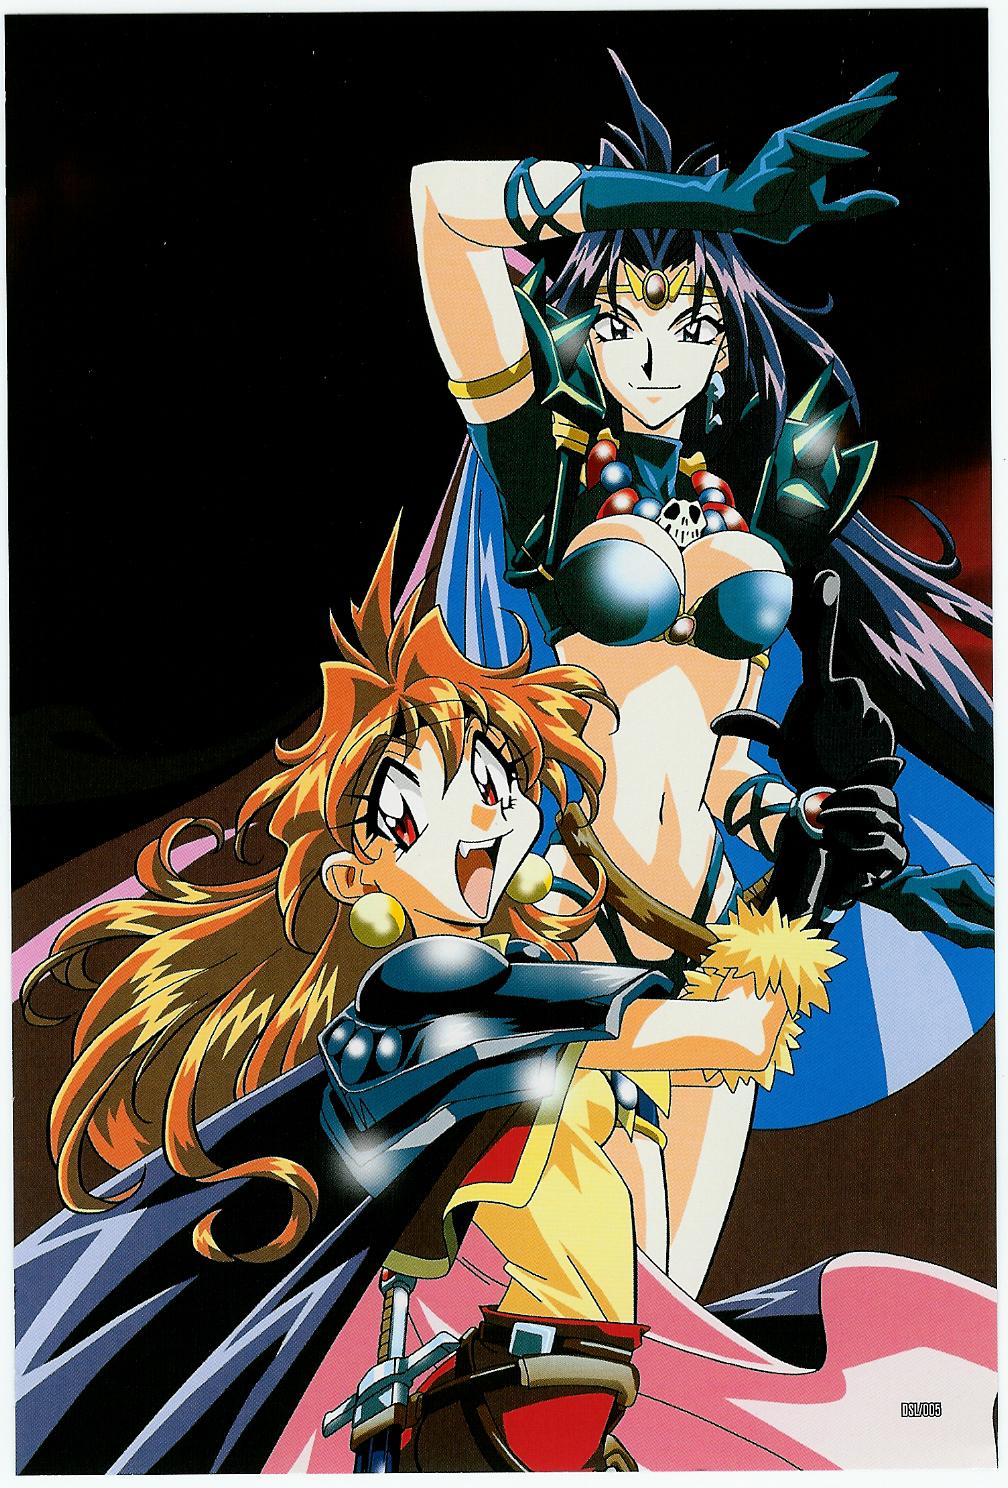 Lina Inverse Naga The Serpent Slayers Fur Highres Scan Scan Artifacts 1990s Style 